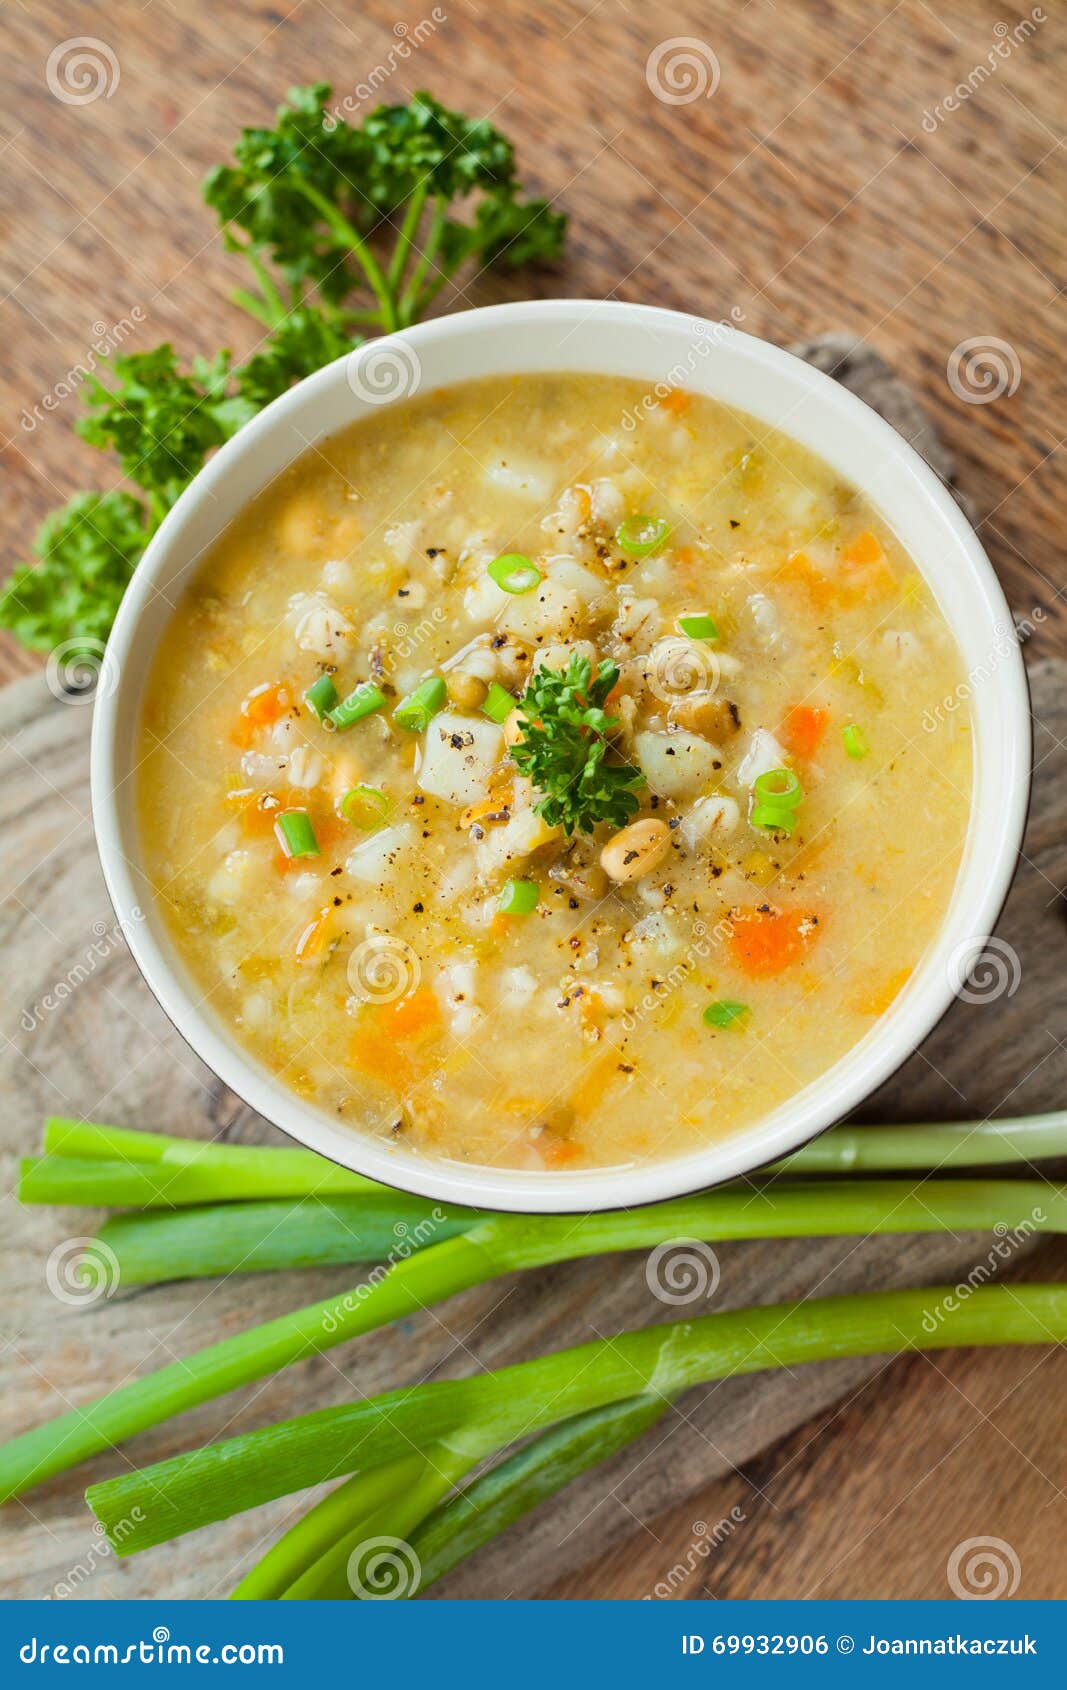 Egg vegetable soup stock photo. Image of cream, appetizer - 69932906